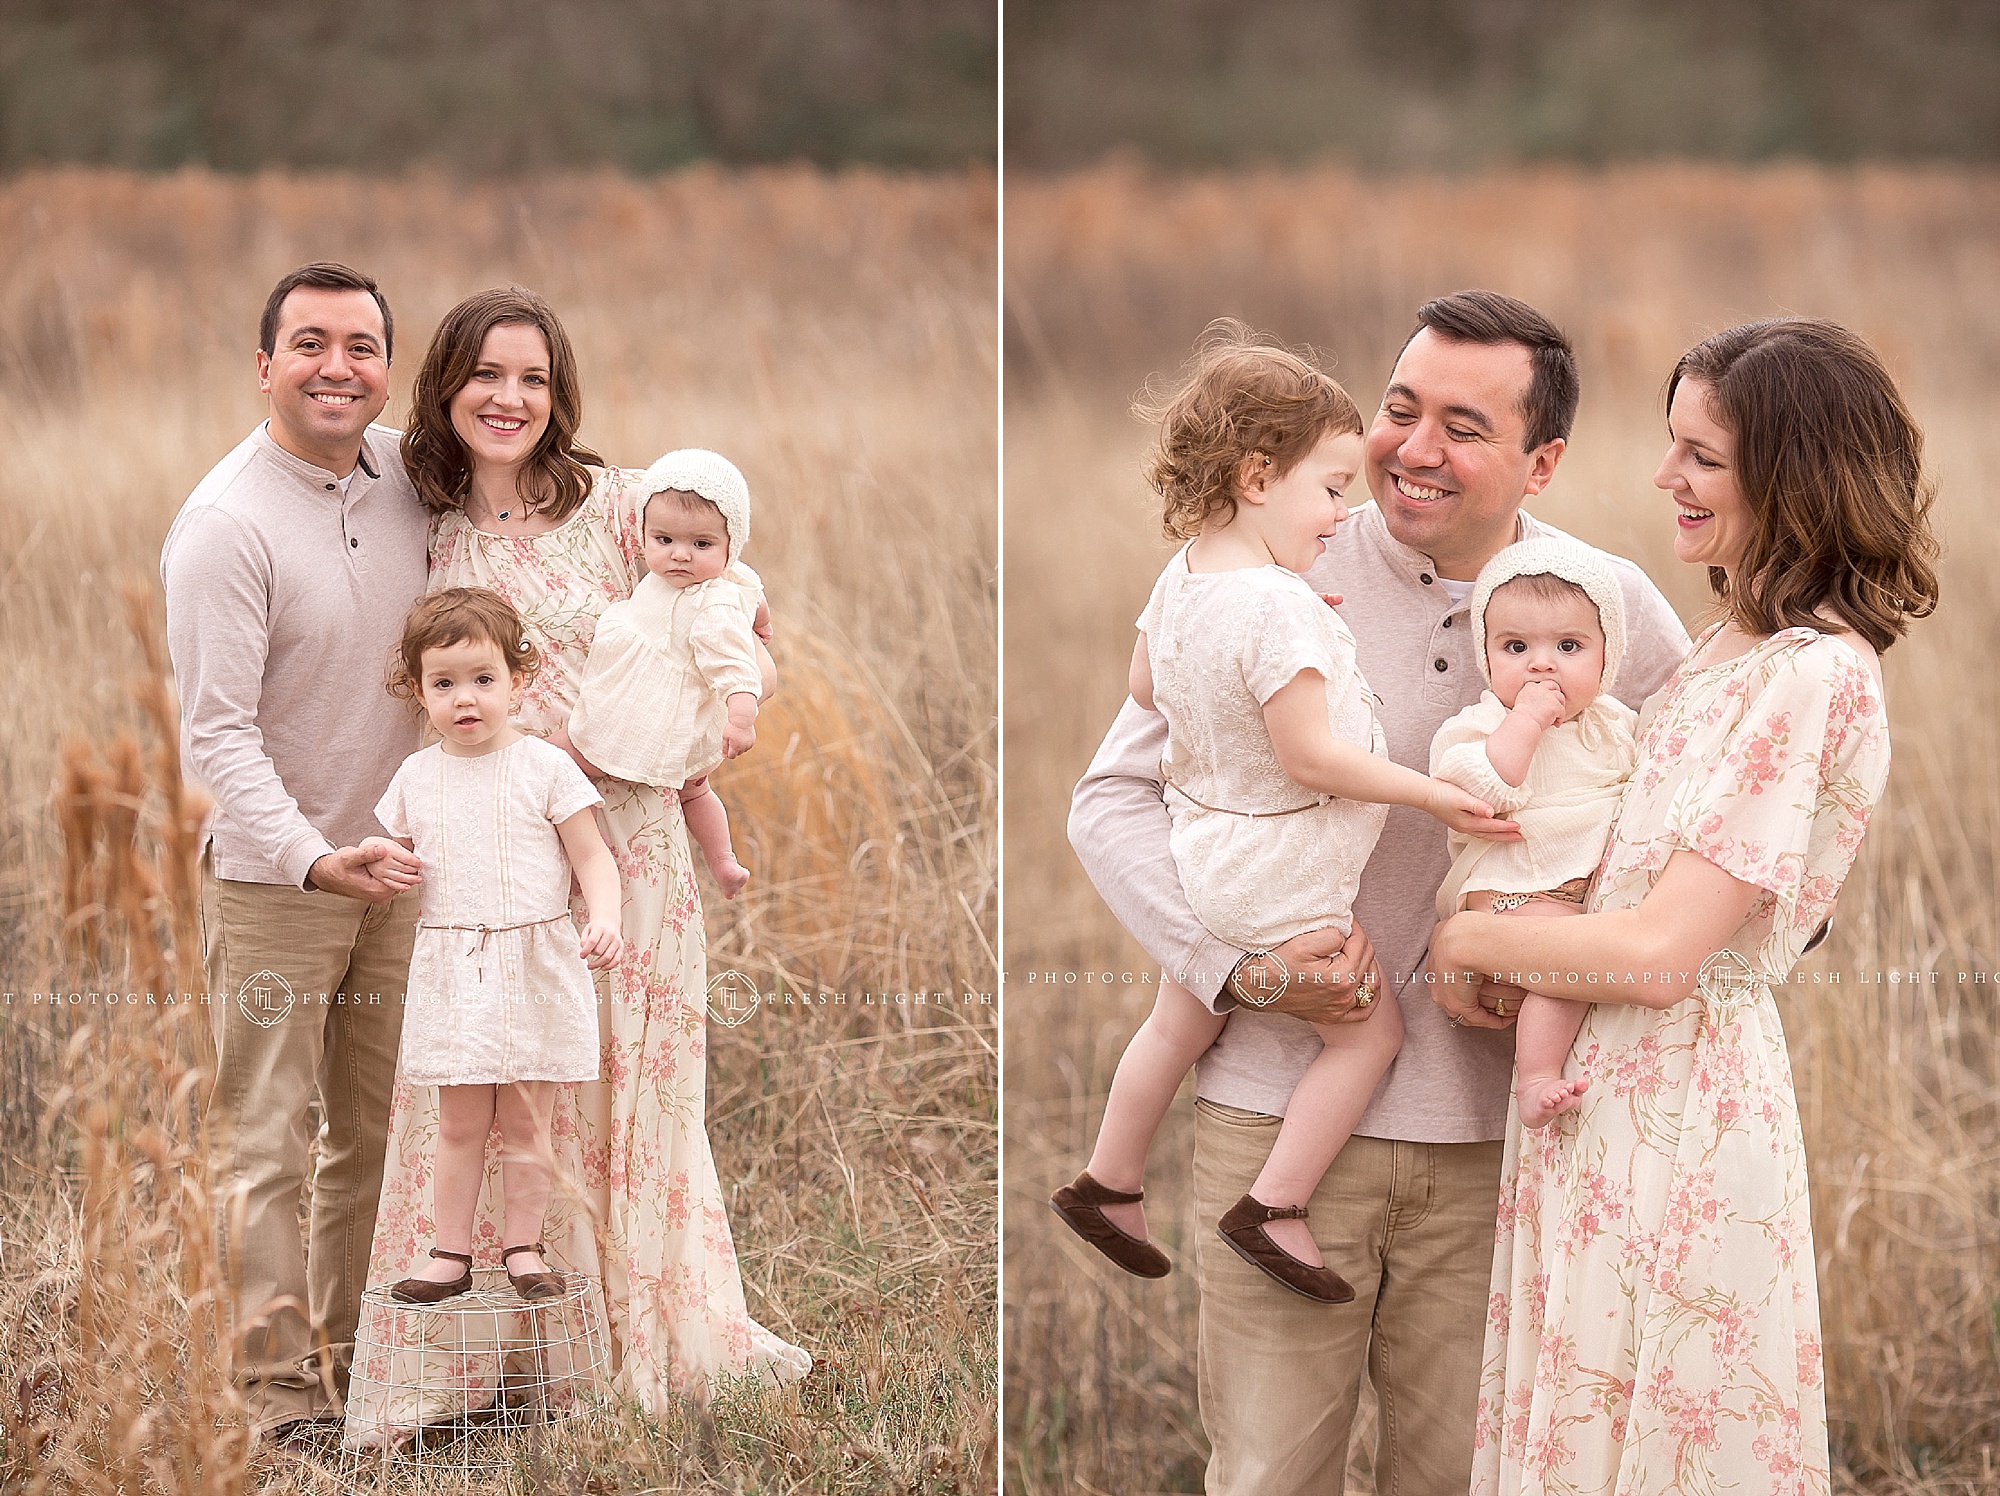 Houston family at an outdoor photography session